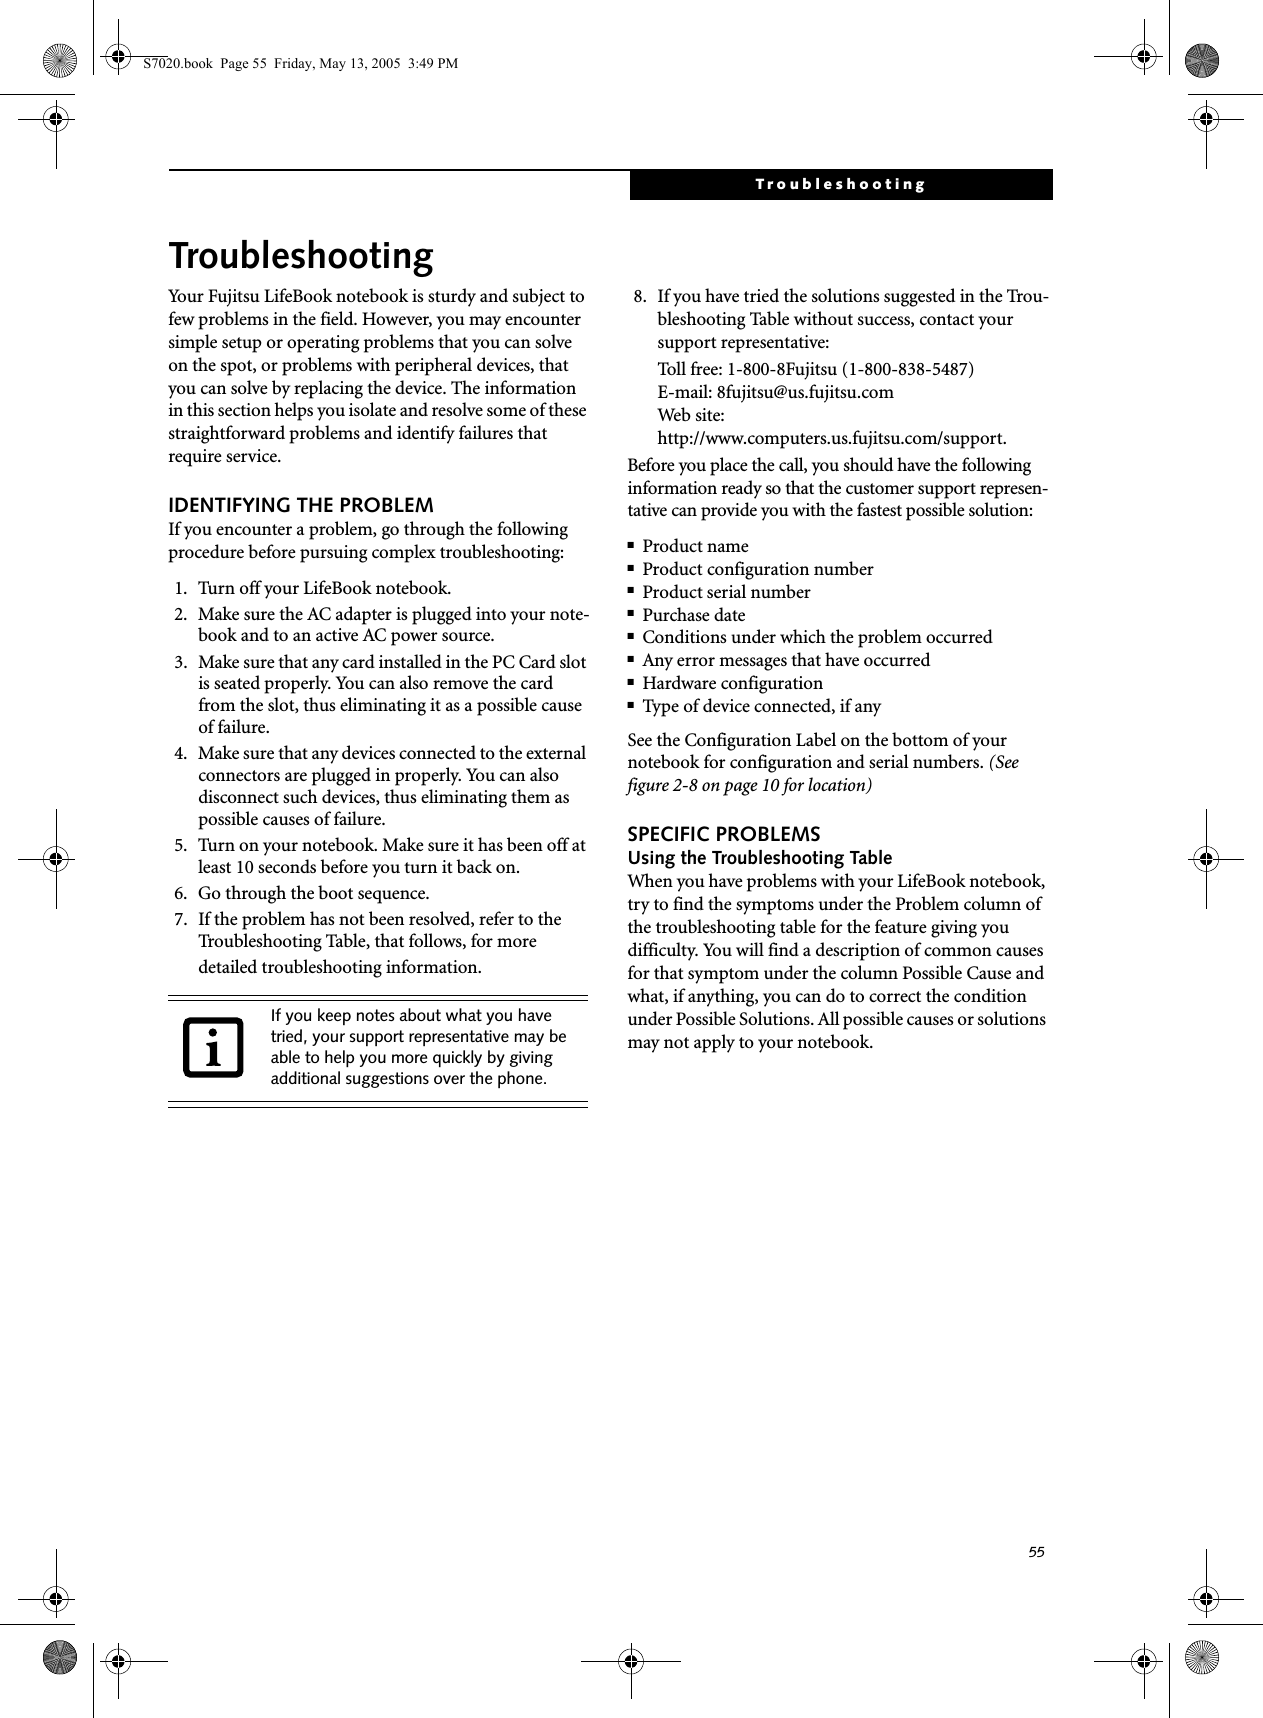 55TroubleshootingTroubleshootingYour Fujitsu LifeBook notebook is sturdy and subject to few problems in the field. However, you may encounter simple setup or operating problems that you can solve on the spot, or problems with peripheral devices, that you can solve by replacing the device. The information in this section helps you isolate and resolve some of these straightforward problems and identify failures that require service.IDENTIFYING THE PROBLEMIf you encounter a problem, go through the following procedure before pursuing complex troubleshooting:1. Turn off your LifeBook notebook.2. Make sure the AC adapter is plugged into your note-book and to an active AC power source.3. Make sure that any card installed in the PC Card slot is seated properly. You can also remove the card from the slot, thus eliminating it as a possible cause of failure.4. Make sure that any devices connected to the external connectors are plugged in properly. You can also disconnect such devices, thus eliminating them as possible causes of failure.5. Turn on your notebook. Make sure it has been off at least 10 seconds before you turn it back on.6. Go through the boot sequence.7. If the problem has not been resolved, refer to the Troubleshooting Table, that follows, for more detailed troubleshooting information. 8. If you have tried the solutions suggested in the Trou-bleshooting Table without success, contact your support representative: Toll free: 1-800-8Fujitsu (1-800-838-5487) E-mail: 8fujitsu@us.fujitsu.com Web site: http://www.computers.us.fujitsu.com/support.Before you place the call, you should have the following information ready so that the customer support represen-tative can provide you with the fastest possible solution:■Product name■Product configuration number■Product serial number■Purchase date■Conditions under which the problem occurred■Any error messages that have occurred■Hardware configuration■Type of device connected, if anySee the Configuration Label on the bottom of yournotebook for configuration and serial numbers. (See figure 2-8 on page 10 for location)SPECIFIC PROBLEMSUsing the Troubleshooting TableWhen you have problems with your LifeBook notebook, try to find the symptoms under the Problem column of the troubleshooting table for the feature giving you difficulty. You will find a description of common causes for that symptom under the column Possible Cause and what, if anything, you can do to correct the condition under Possible Solutions. All possible causes or solutions may not apply to your notebook.If you keep notes about what you have tried, your support representative may be able to help you more quickly by giving additional suggestions over the phone.S7020.book  Page 55  Friday, May 13, 2005  3:49 PM